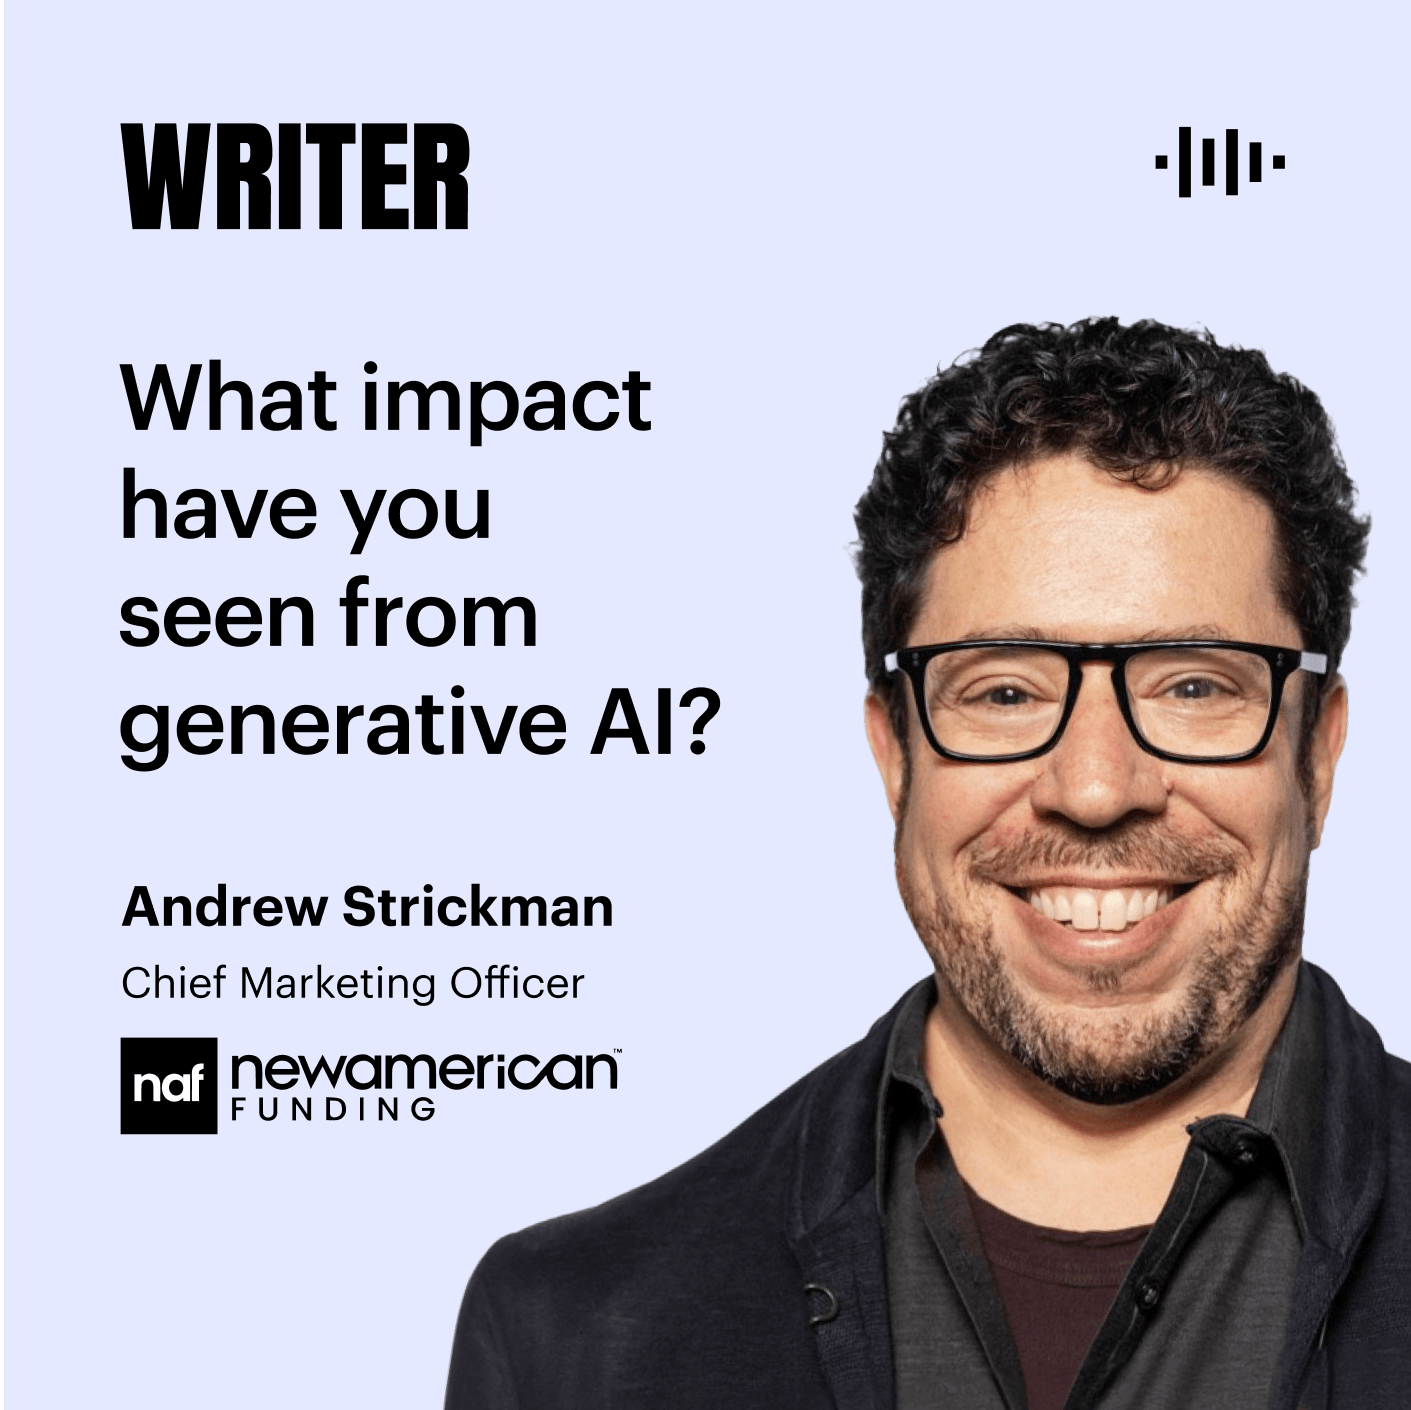 What impact have you seen from generative AI?